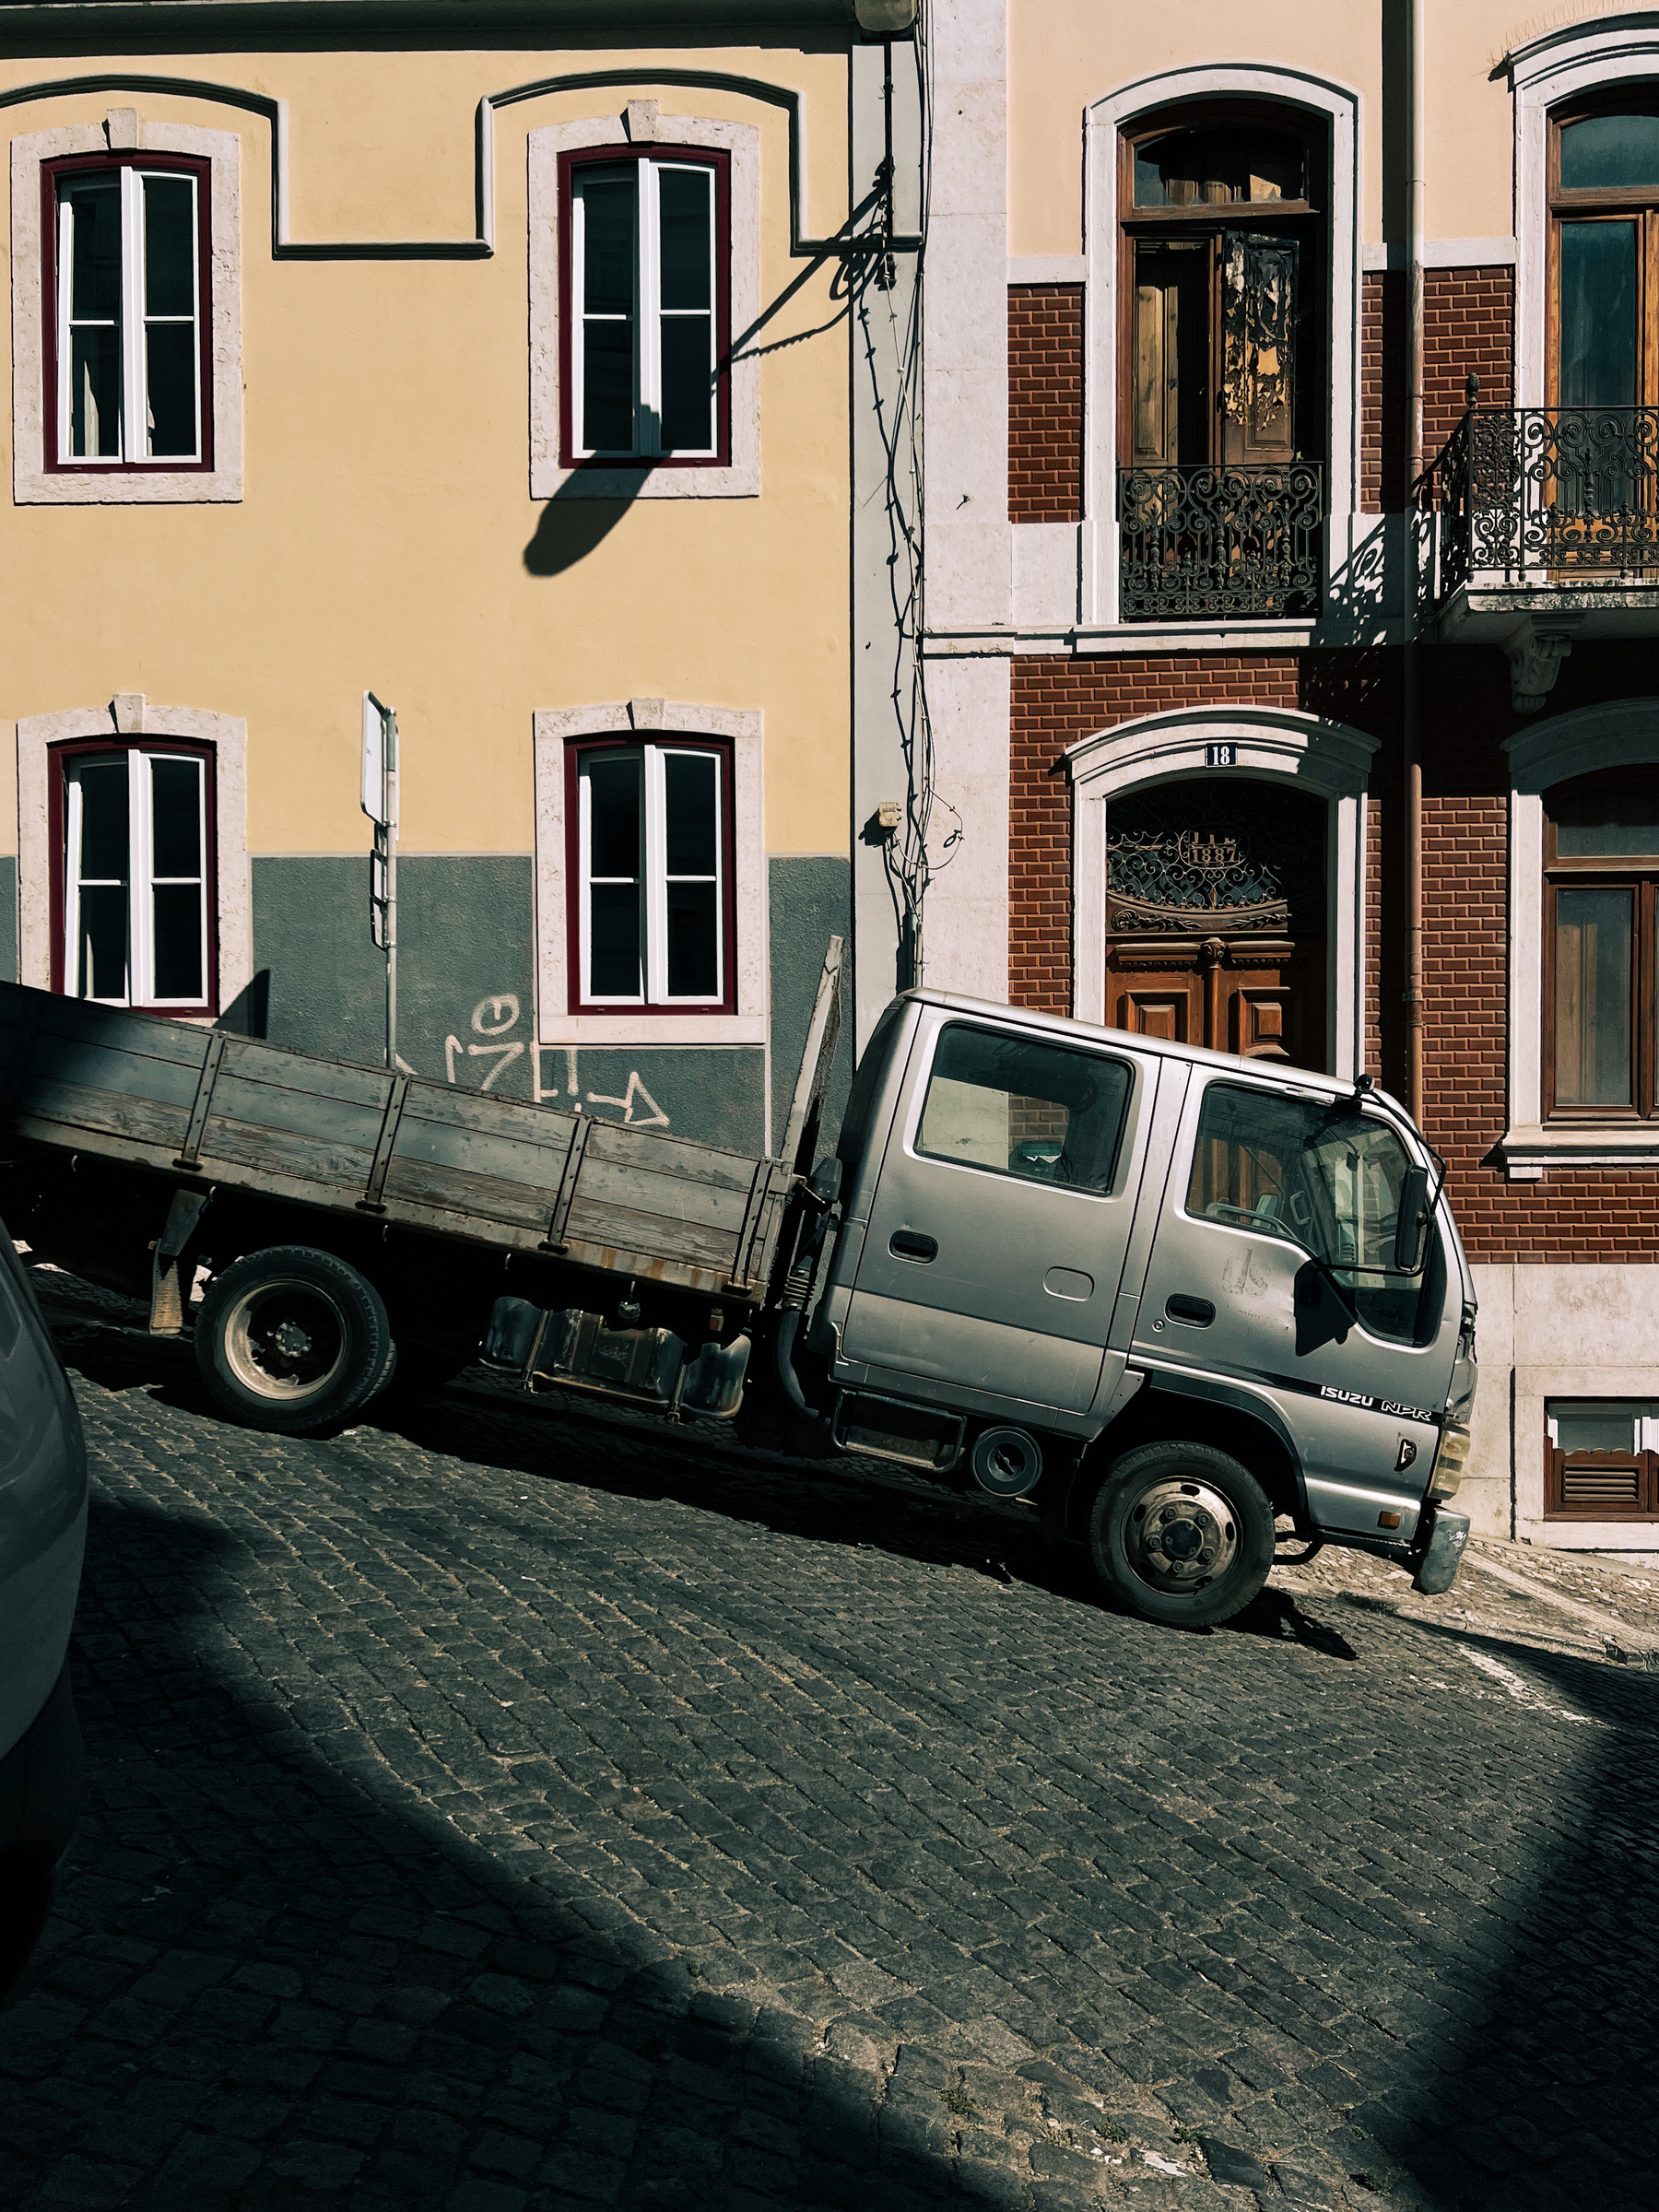 A truck is parked on a very steep street.